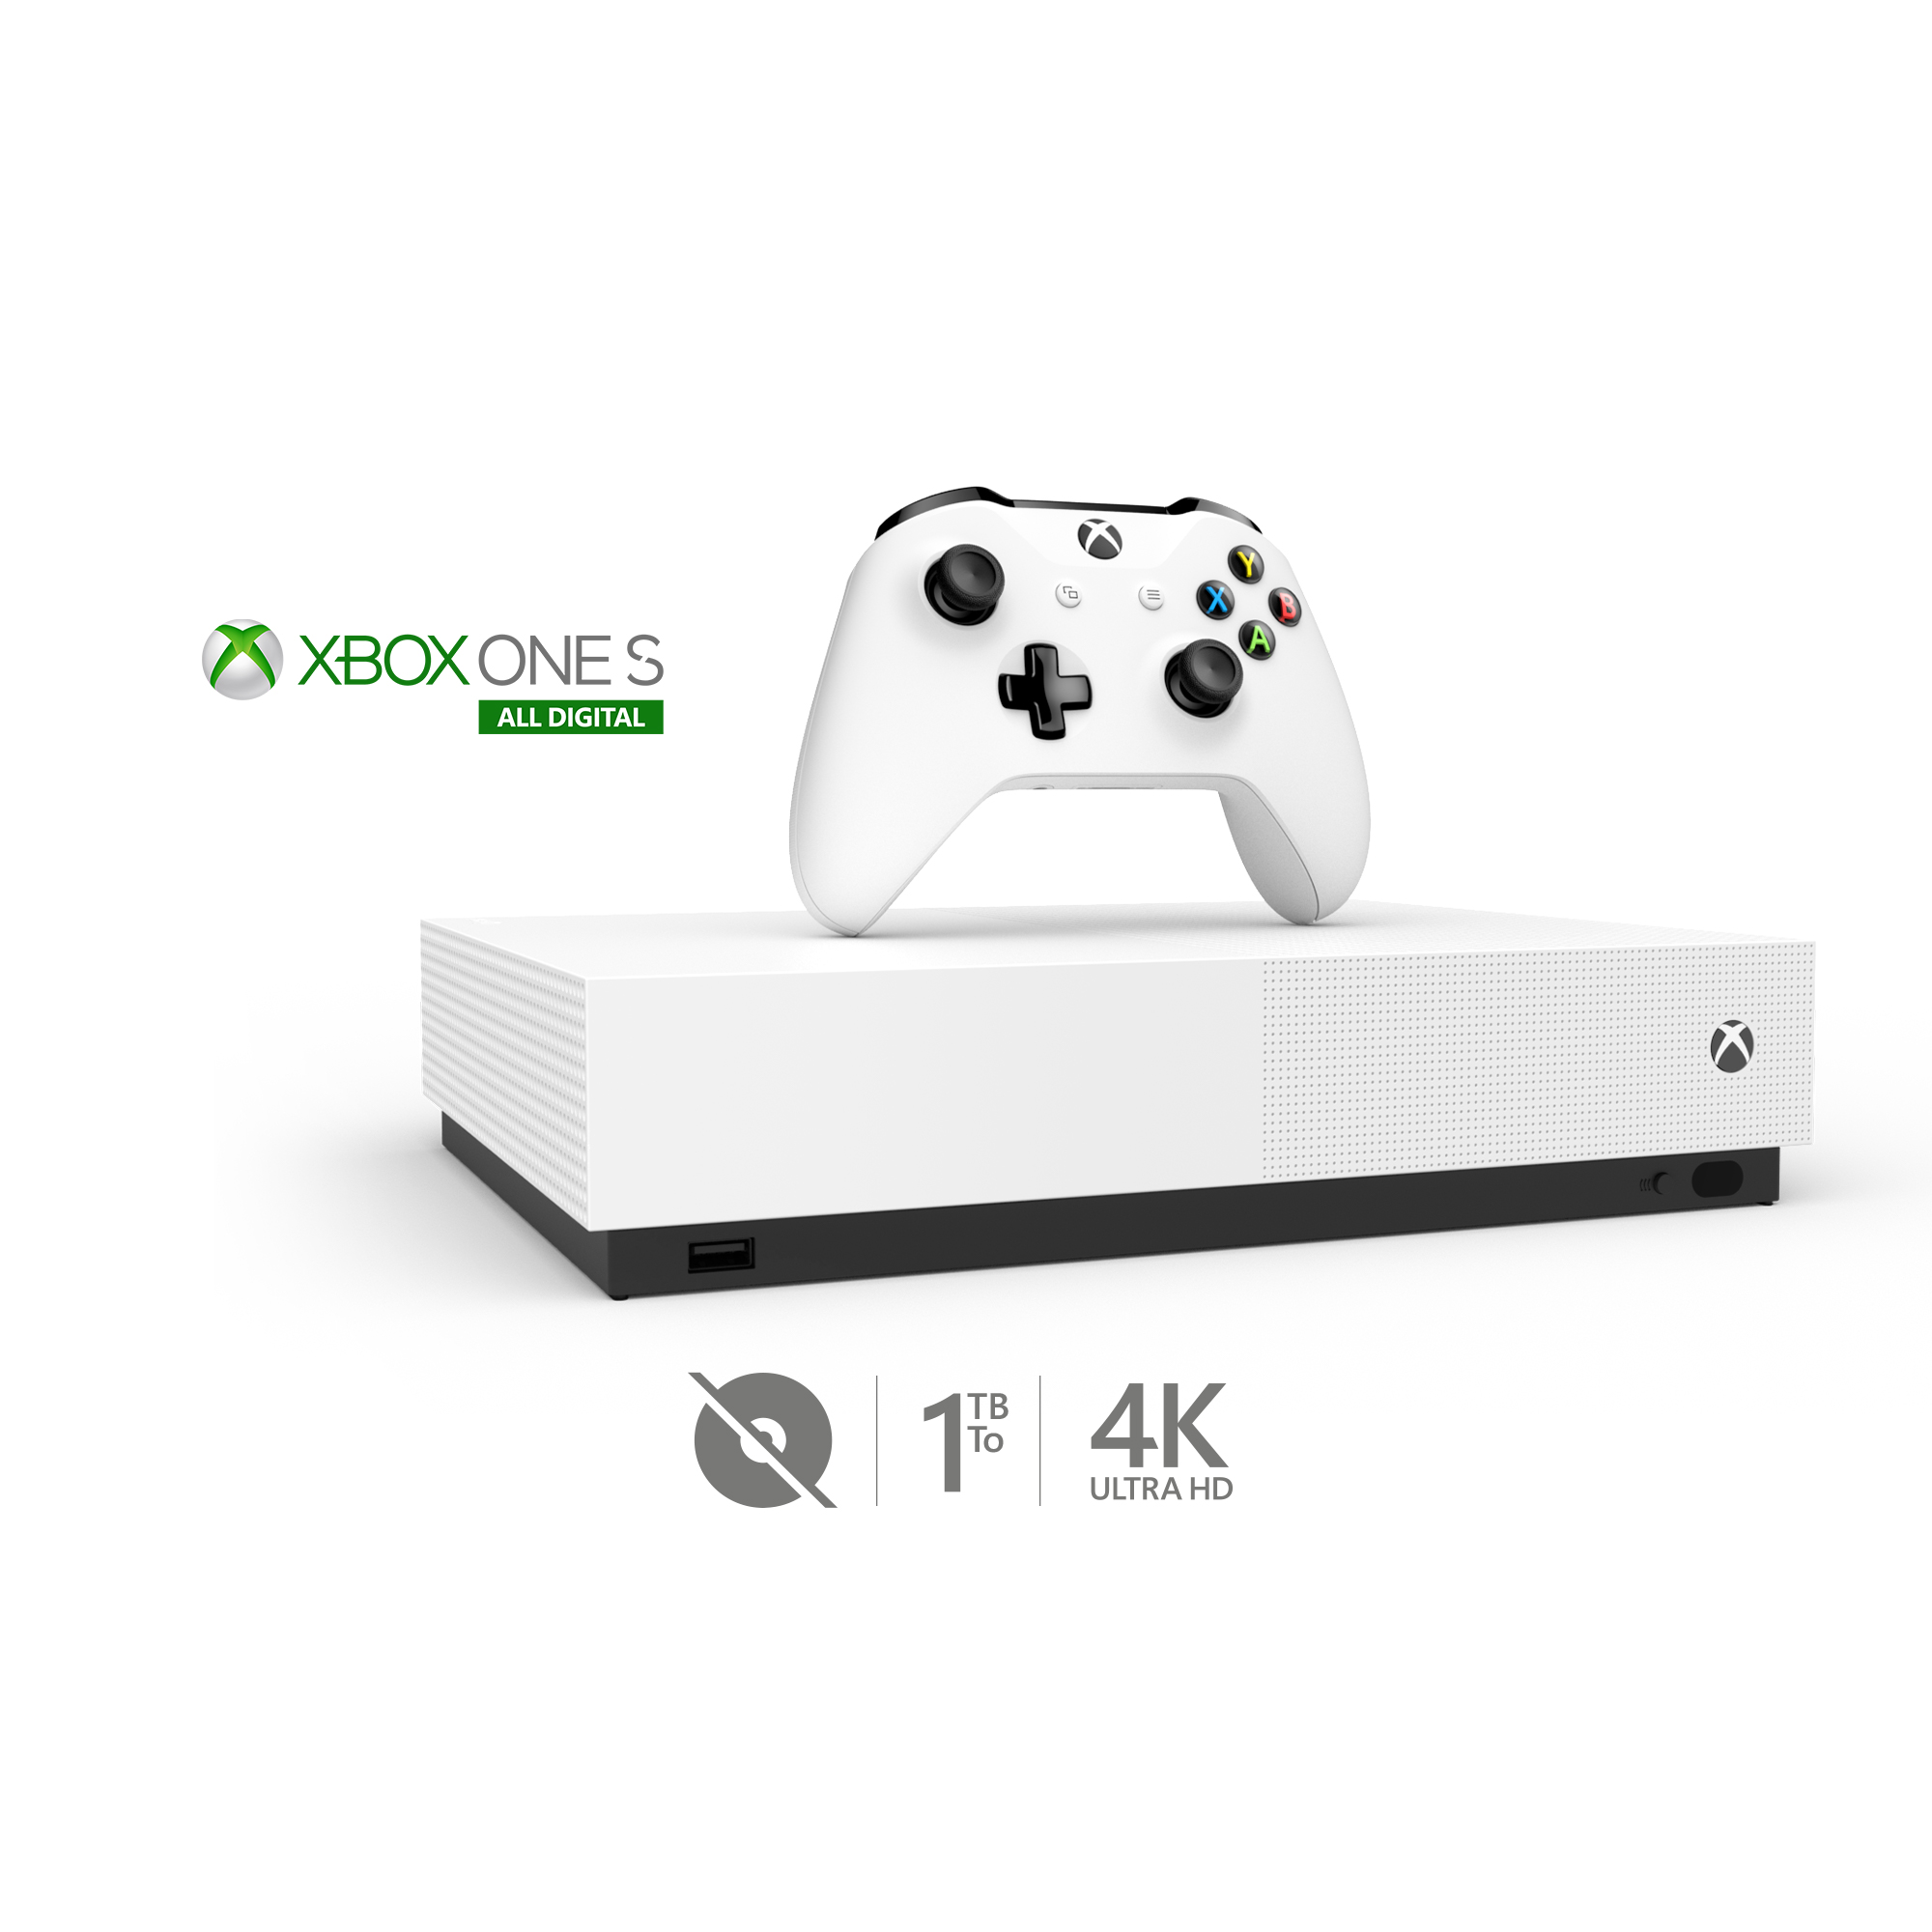 Microsoft Xbox One S 1TB All Digital Edition 3 Game Bundle (Disc-free Gaming), White, NJP-00050 - image 6 of 13